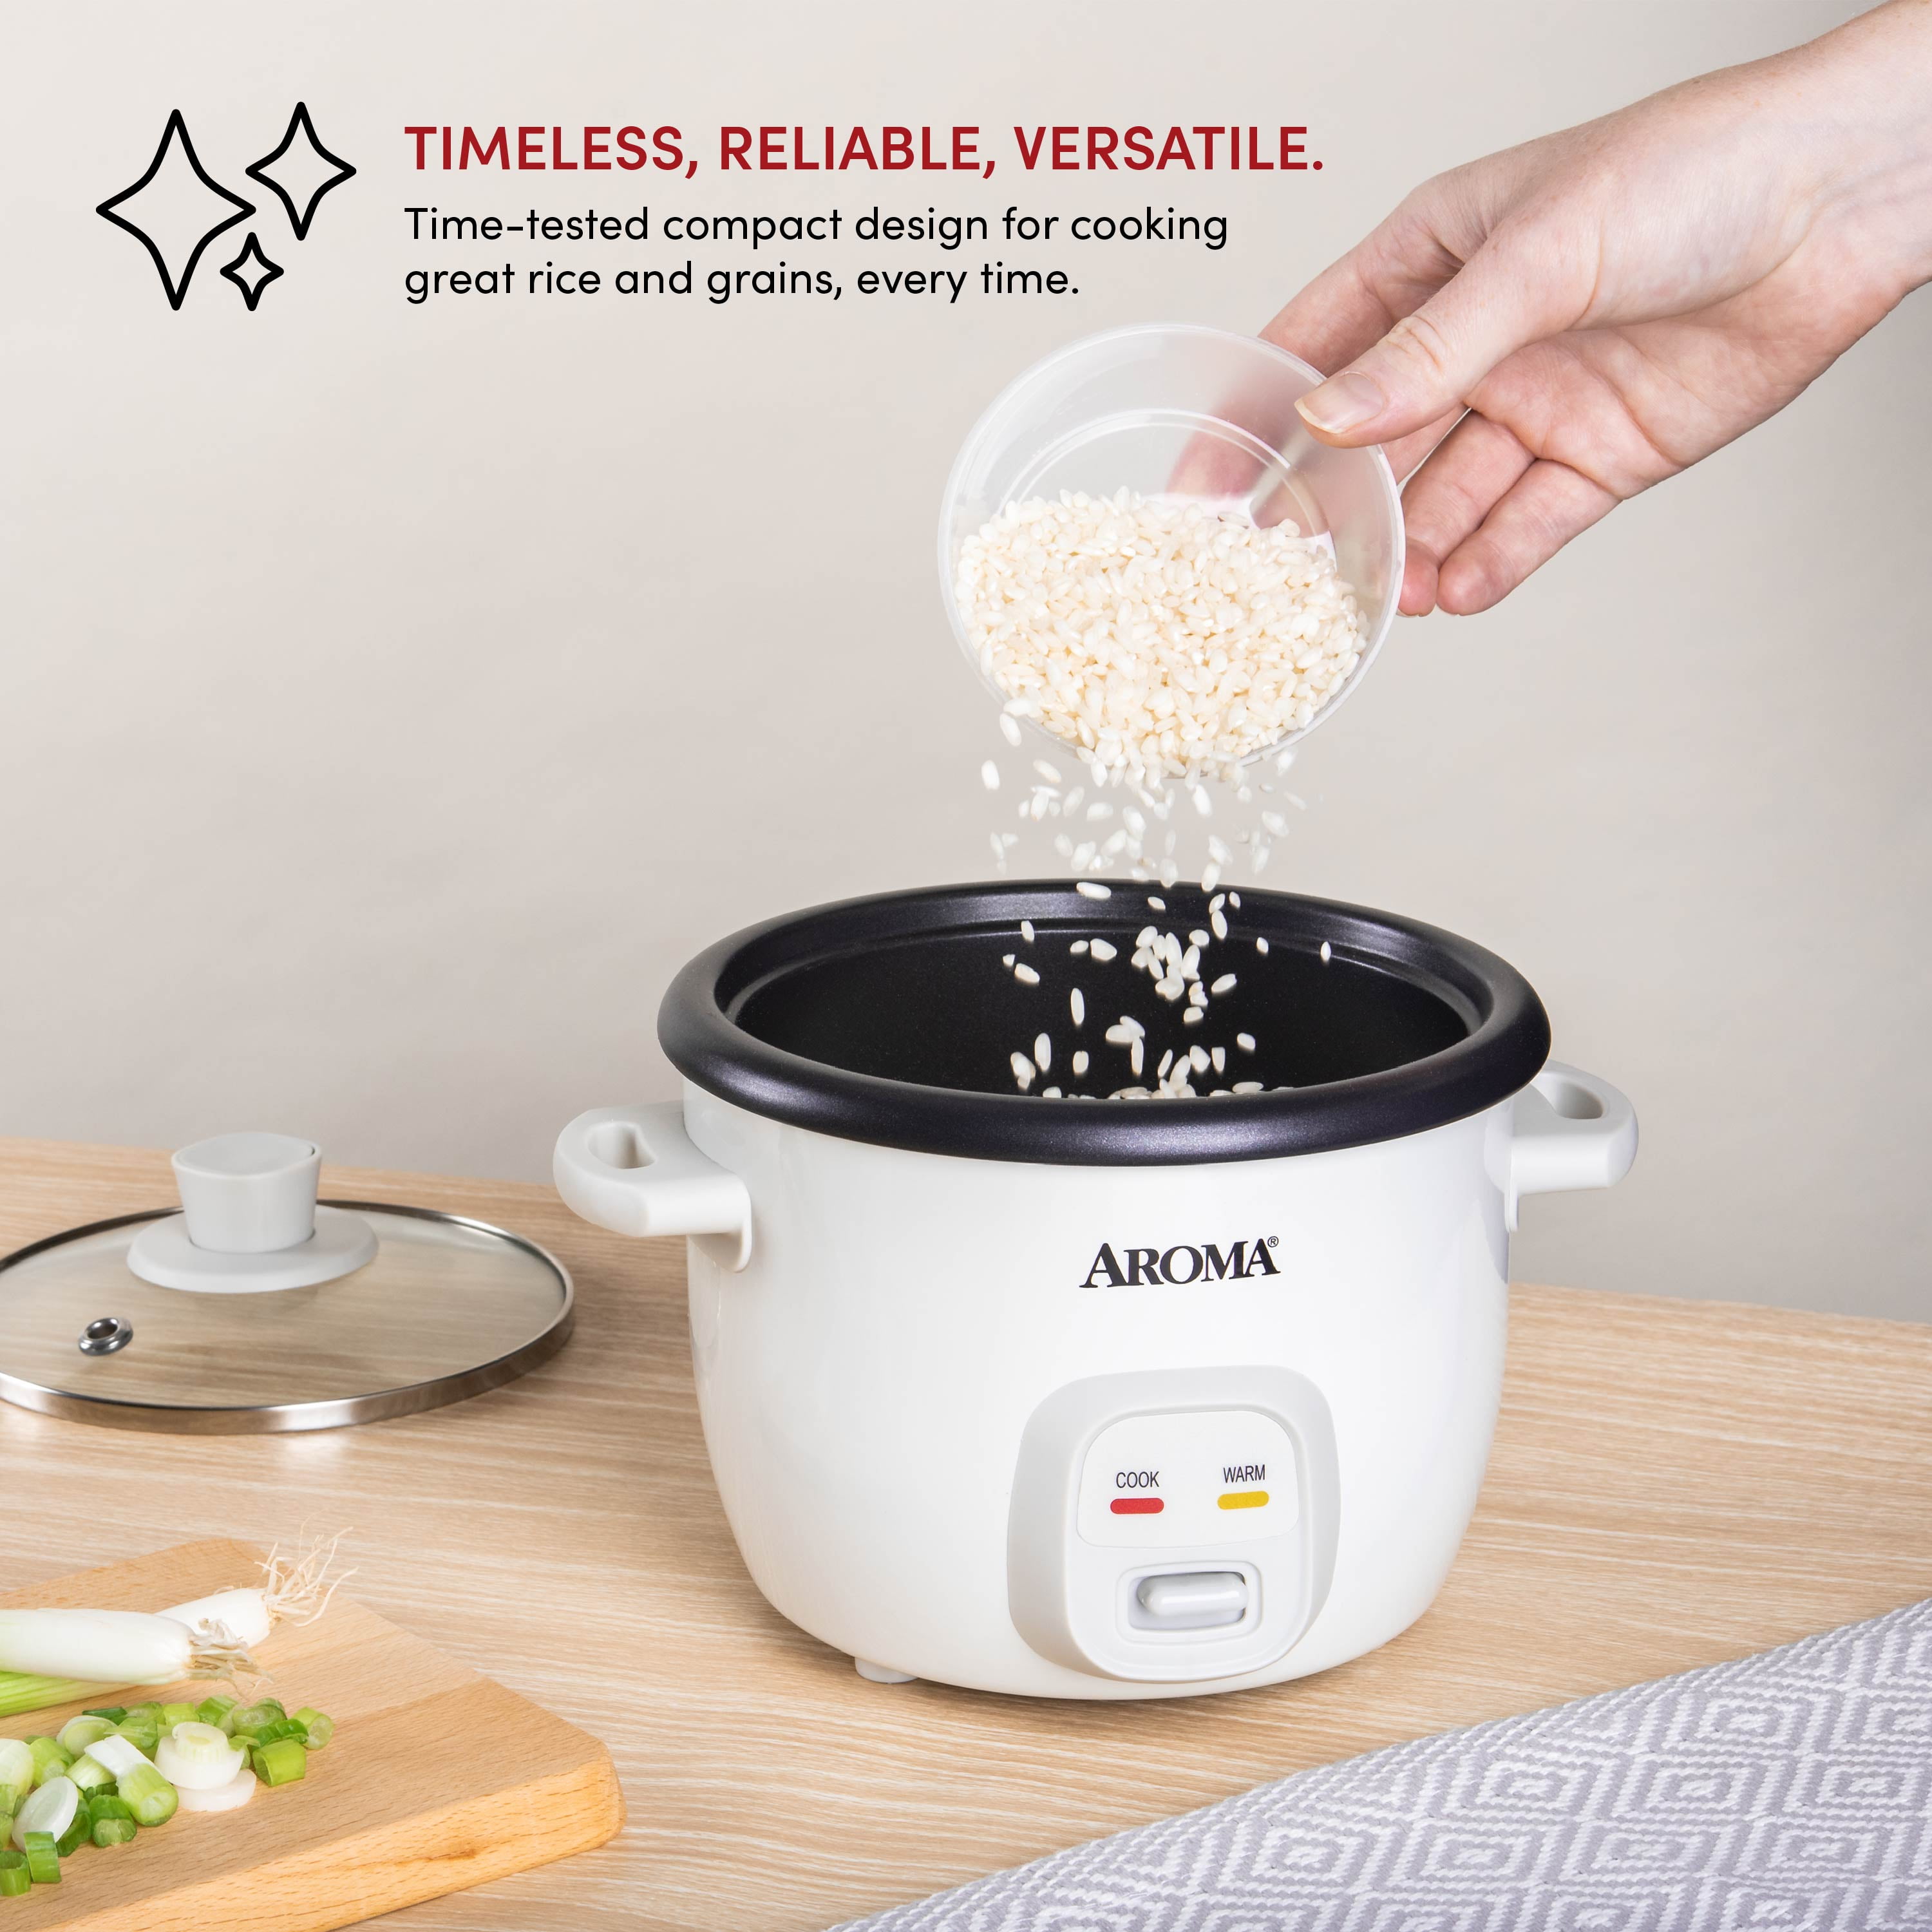 AROMA Professional Digital Rice Cooker, Multicooker, 4-Cup (Uncooked) /  8-Cup (Cooked), Steamer, Slow Cooker, Grain Cooker, 2Qt, Stainless Steel